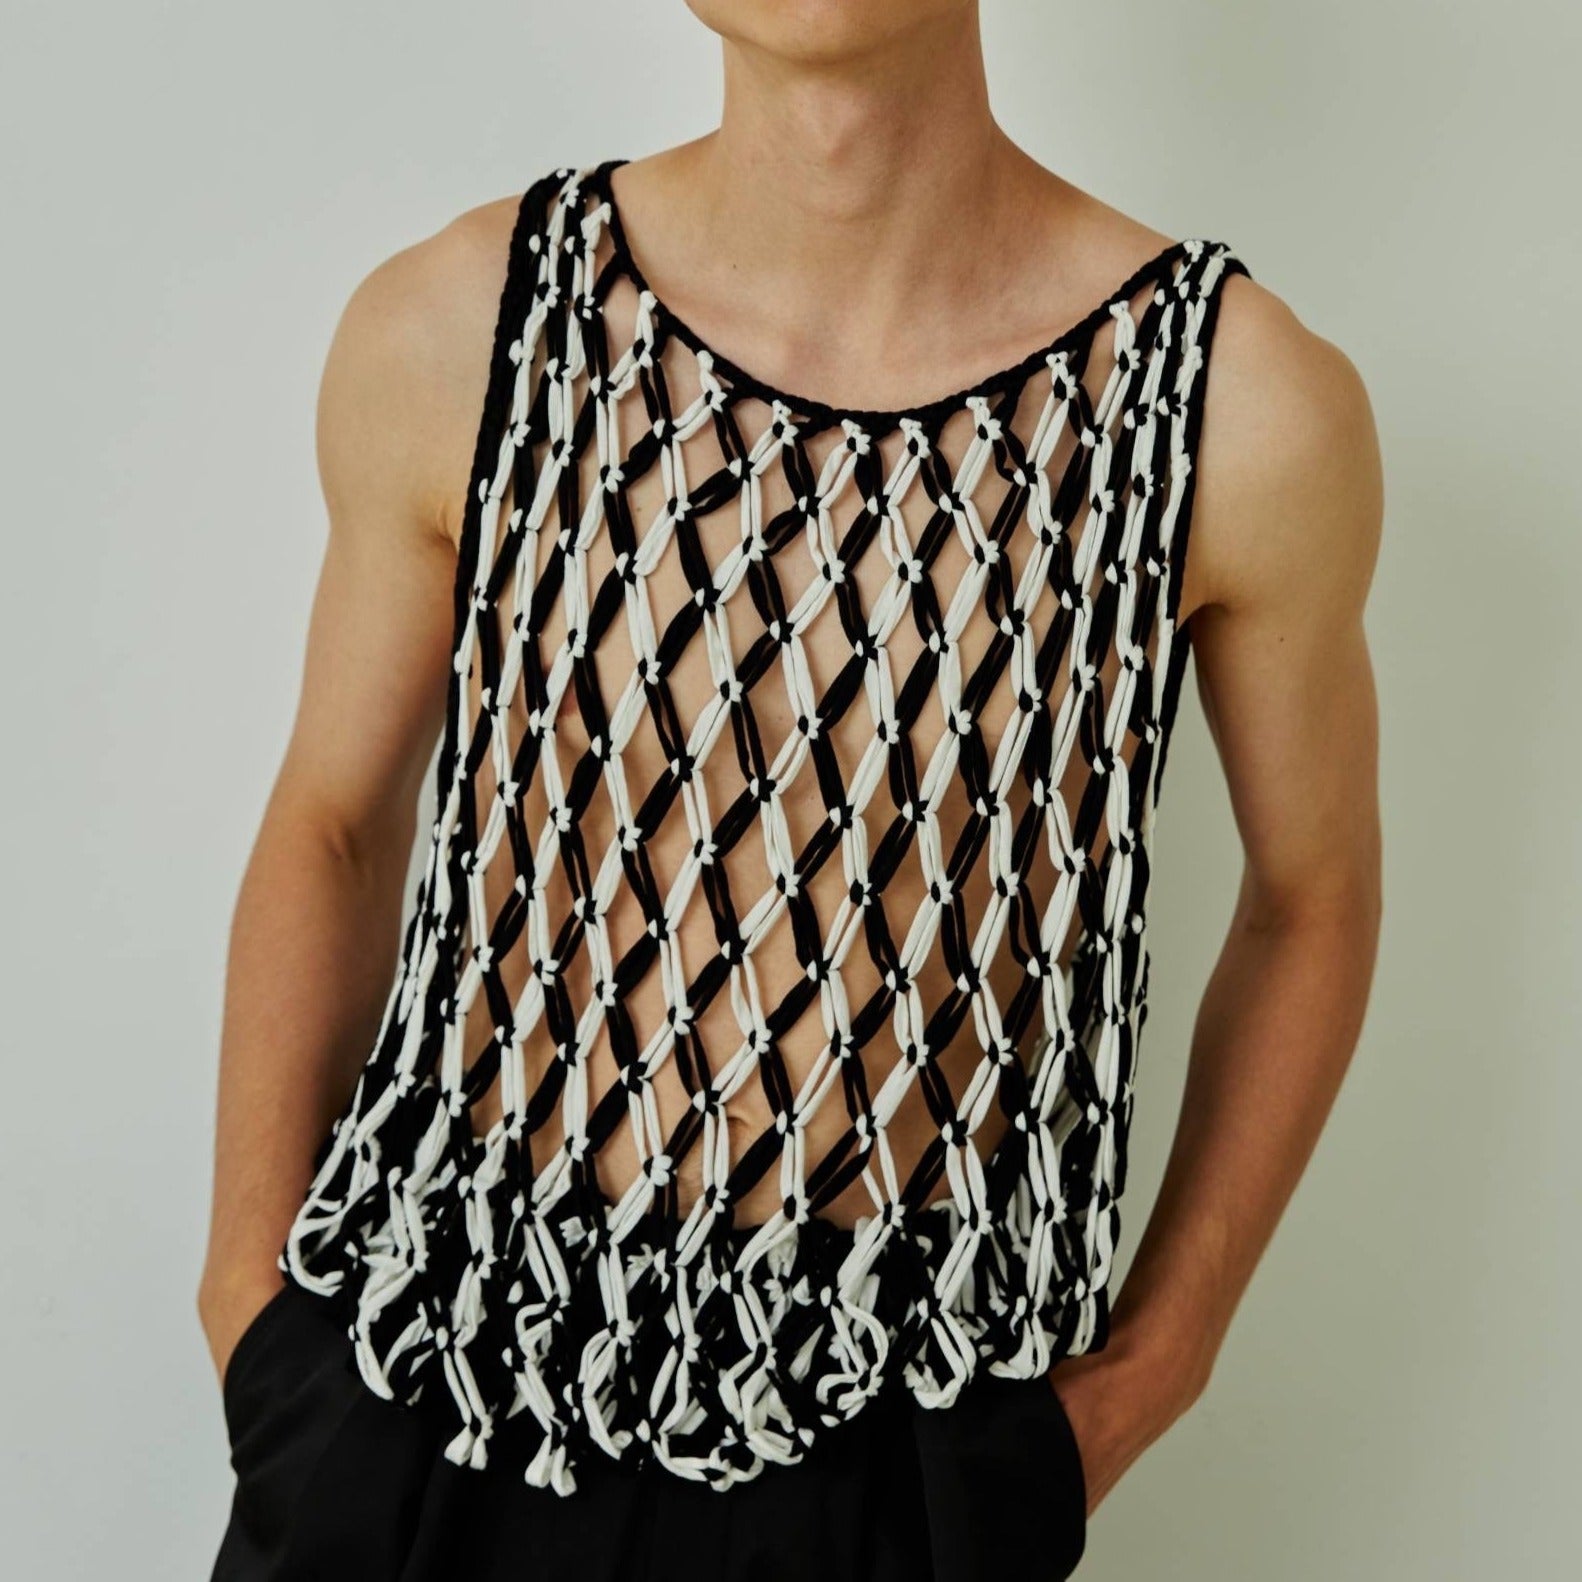 KNOT TANK TOP twotone black and white